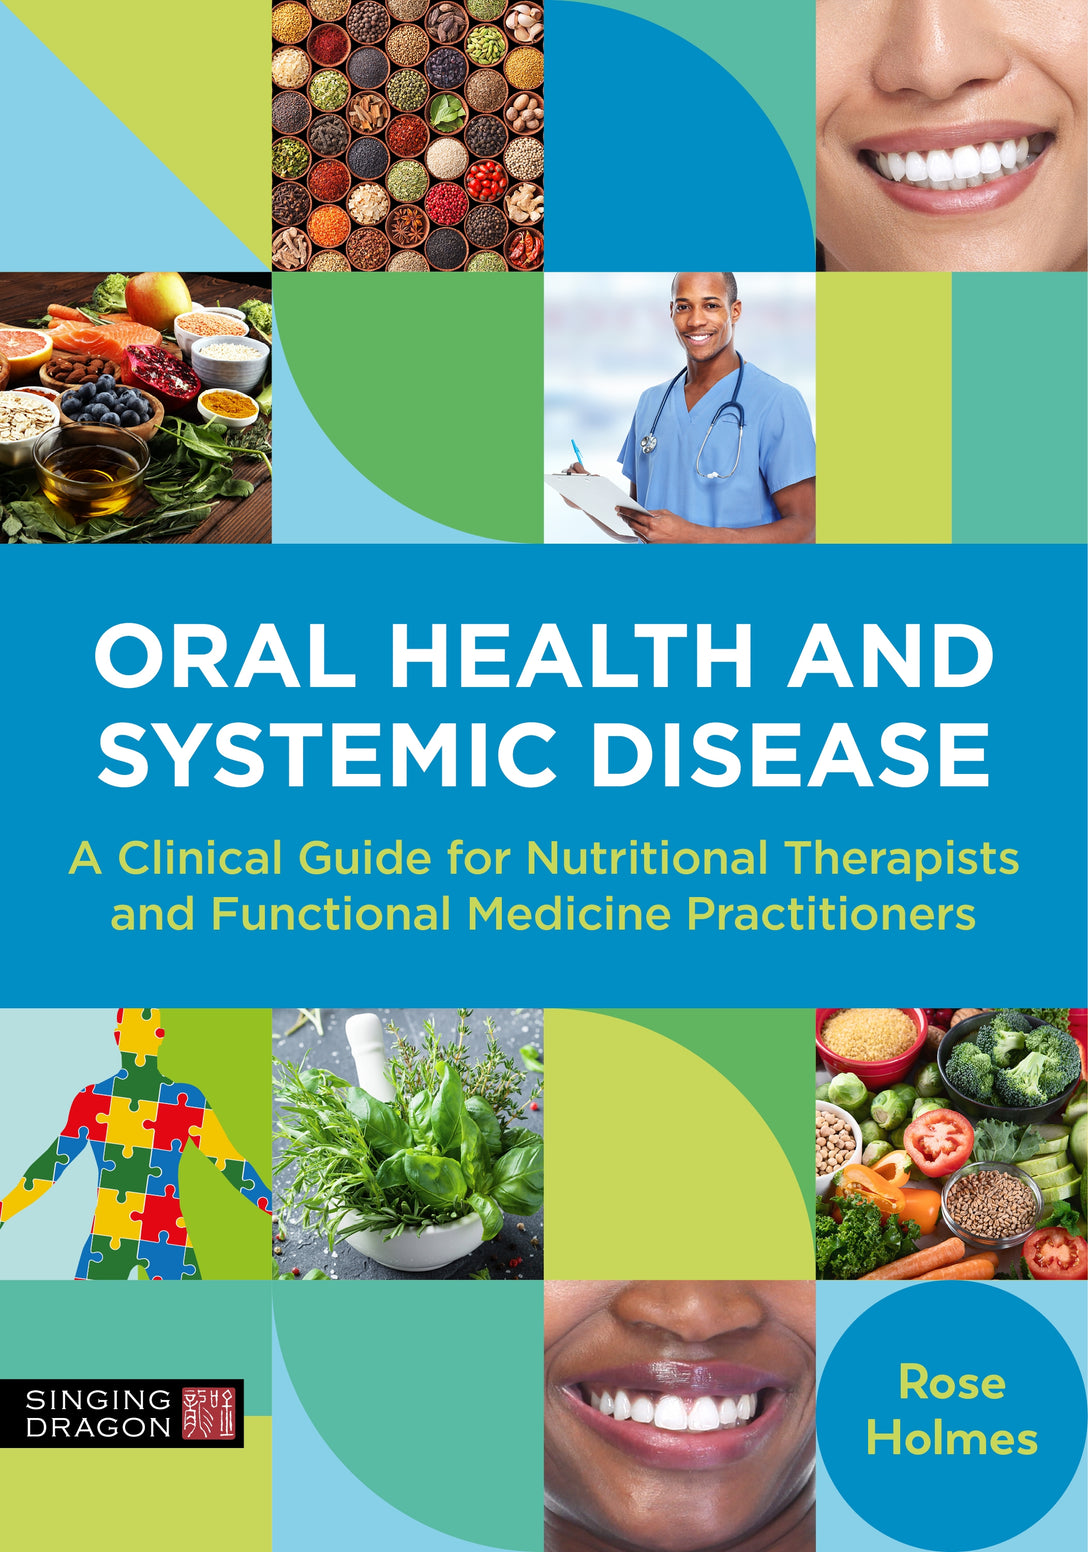 Oral Health and Systemic Disease by Rose Holmes